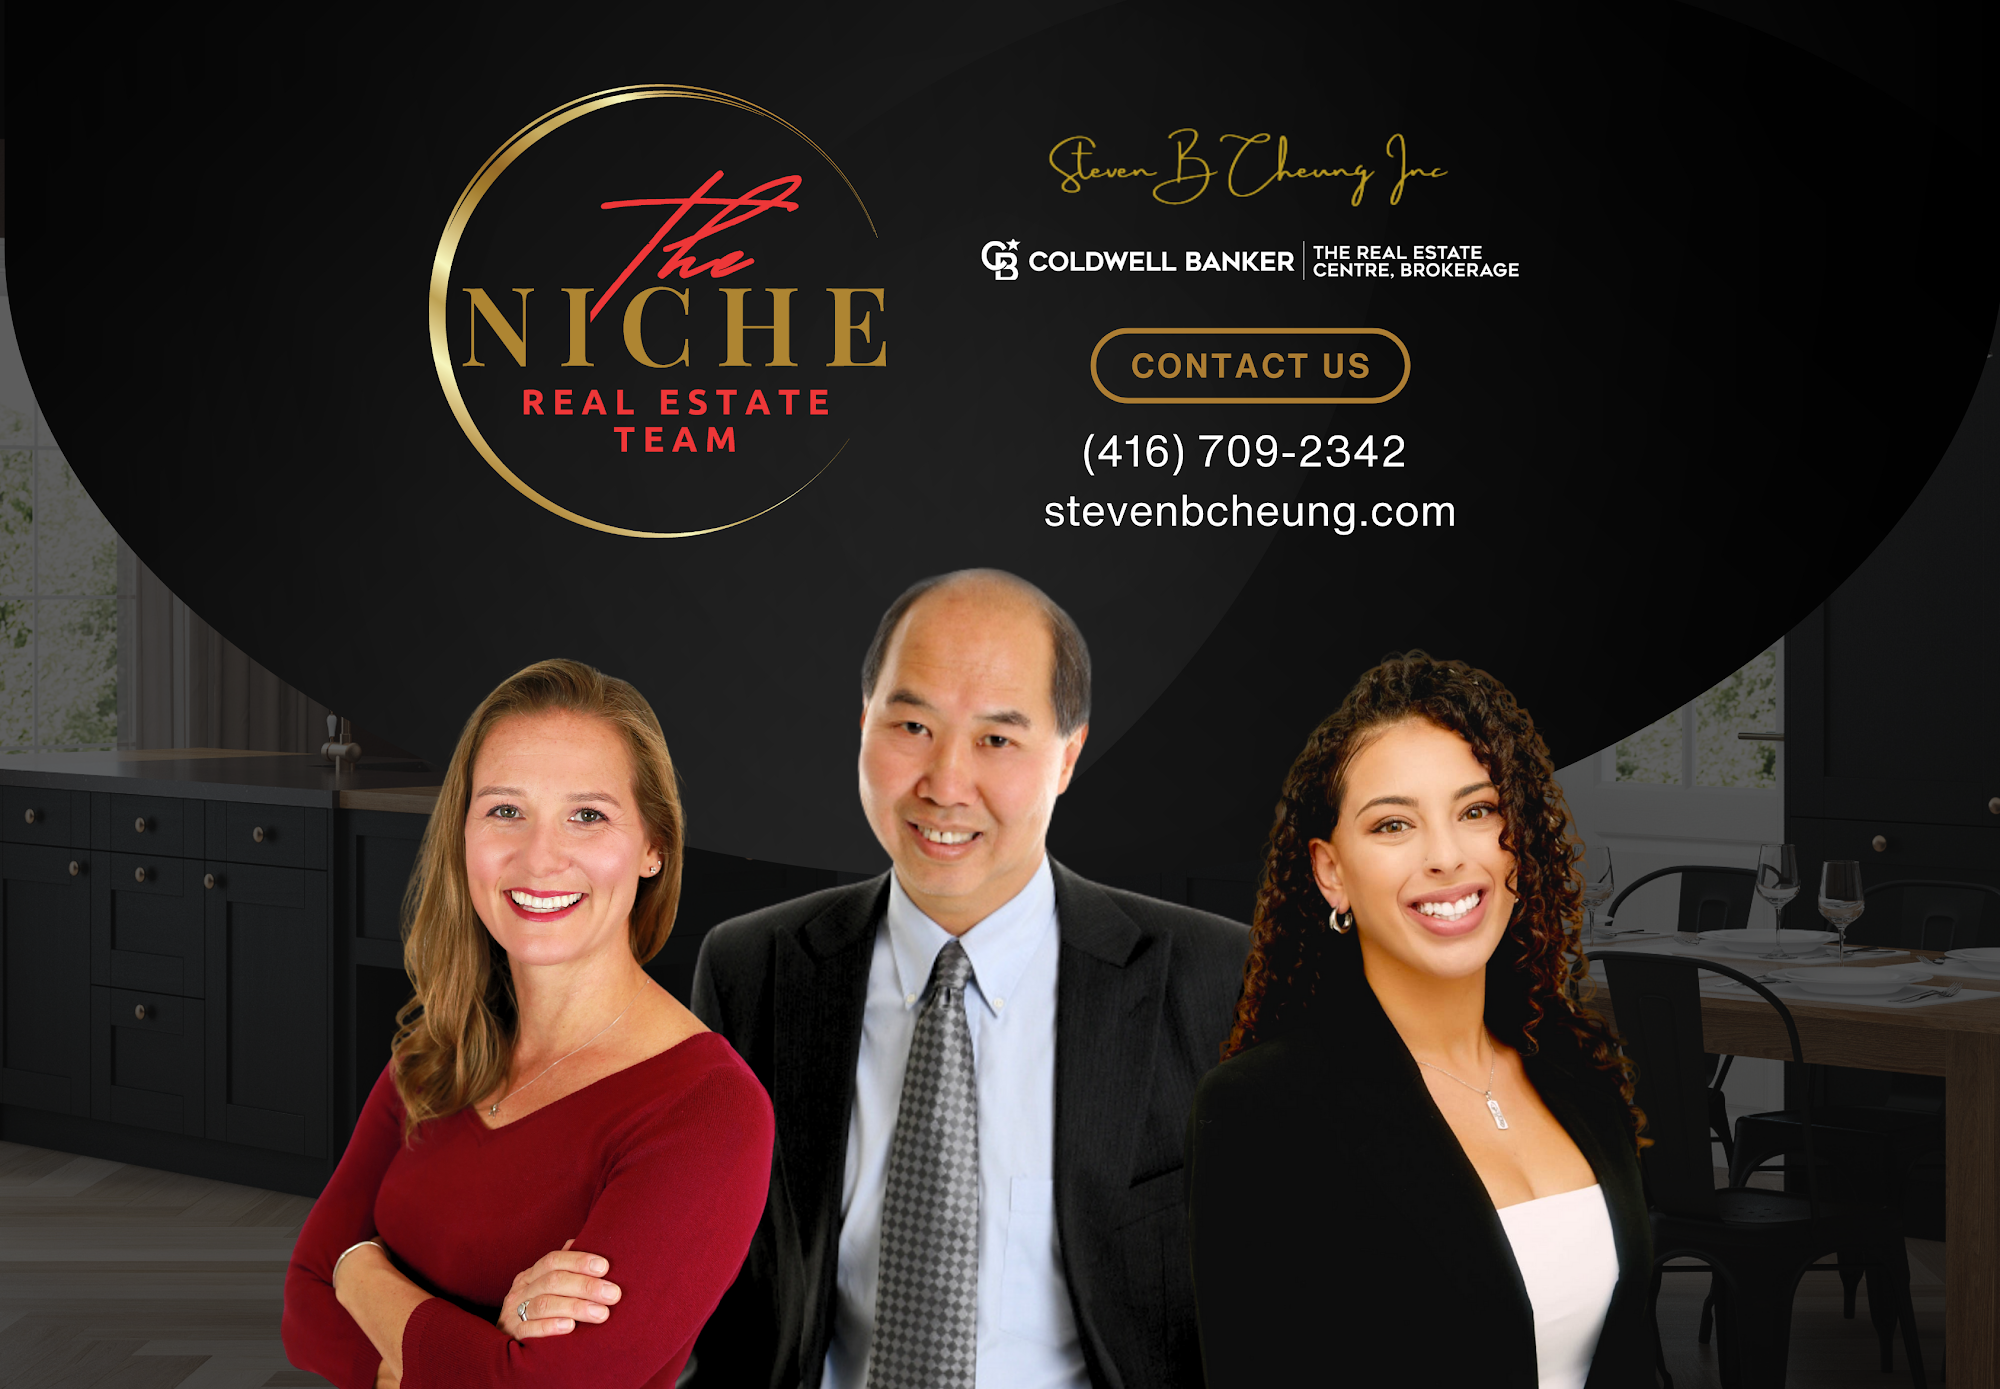 Steven B Cheung Inc. - Niche Real Estate Team - Coldwell Banker The Real Estate Centre